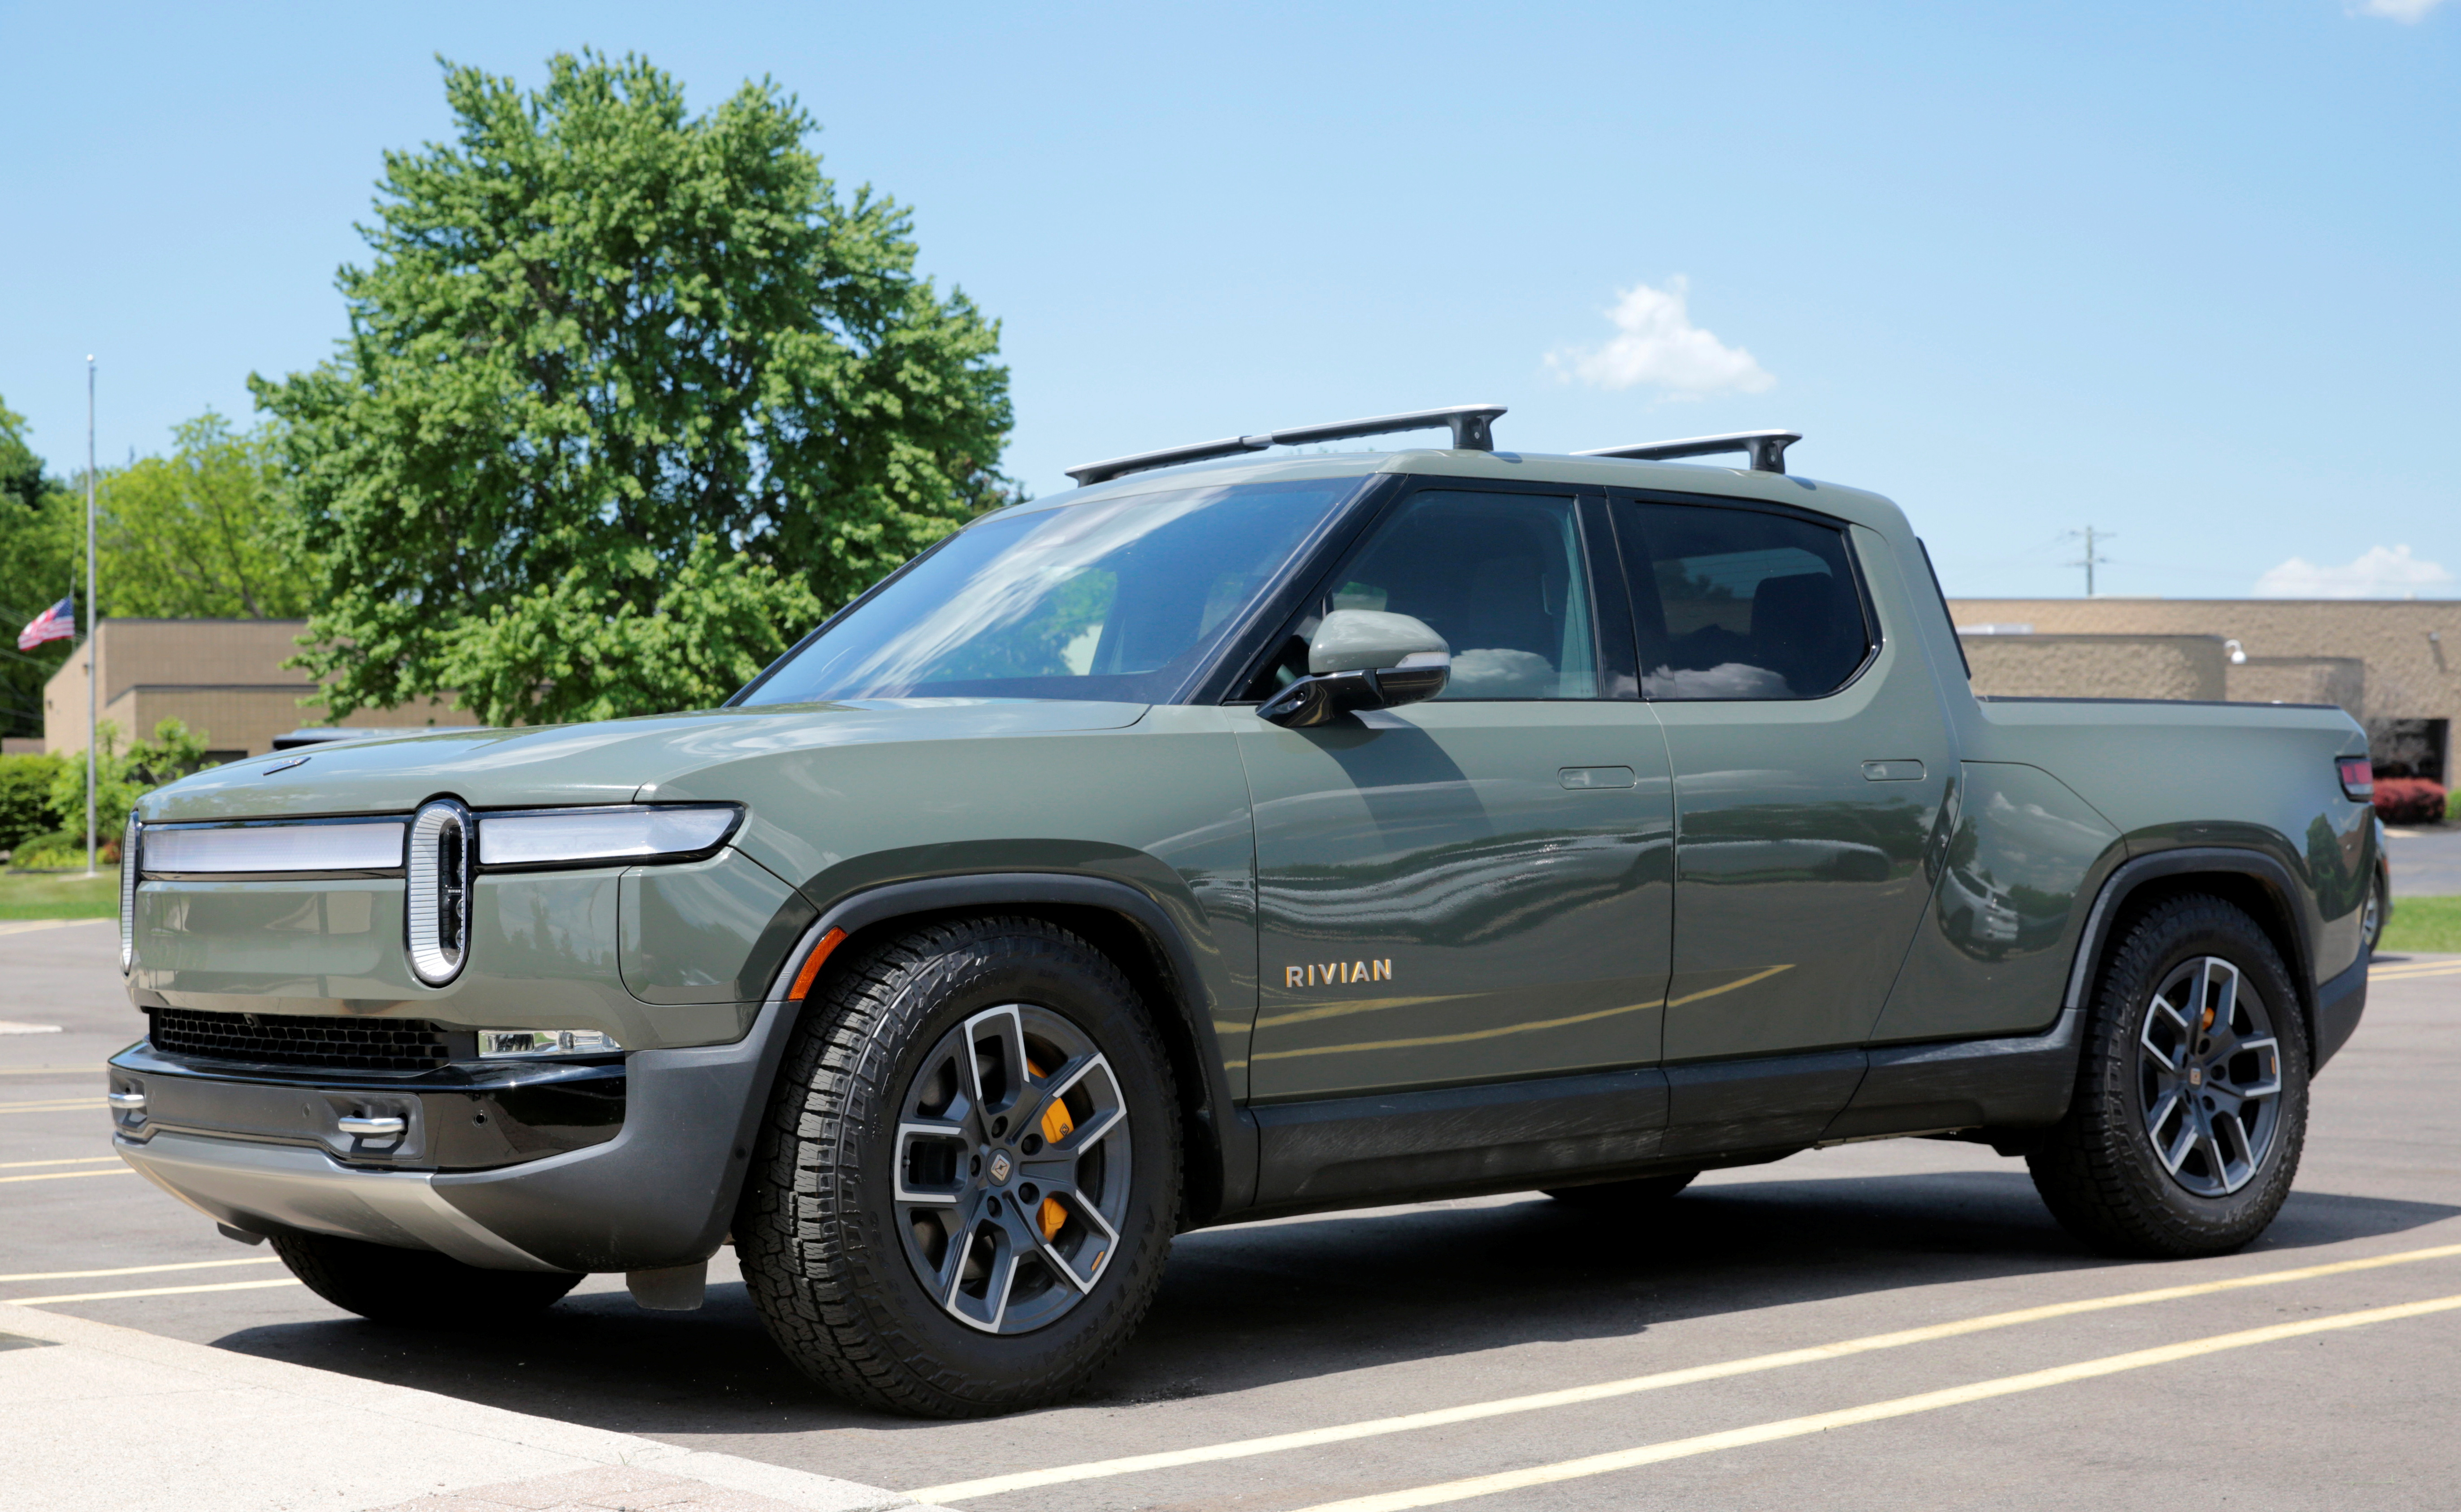 Manufacturing expert tears down the Rivian electric truck